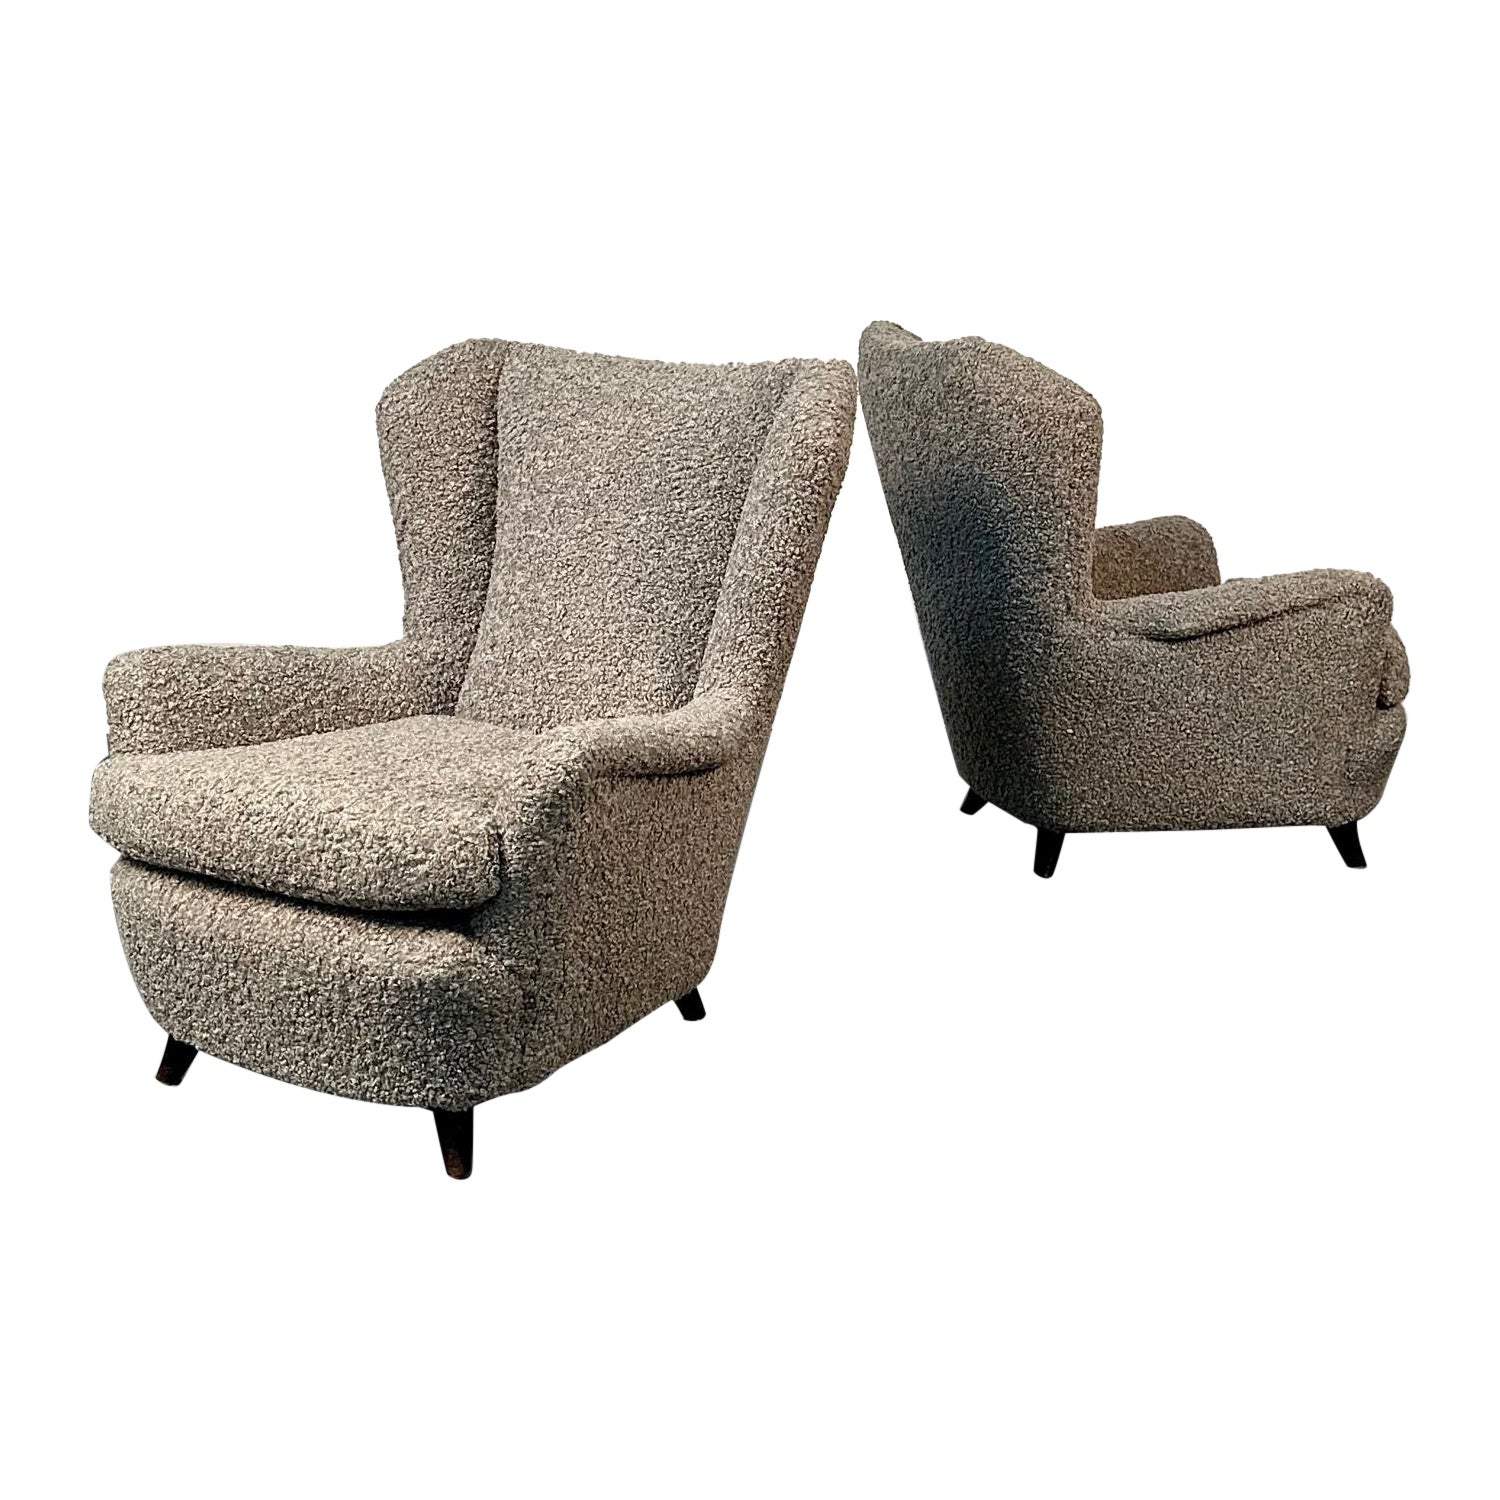 Pair Italian Mid-Century Modern Wingback Lounge Chairs, Zanuso Style Grey Boucle For Sale